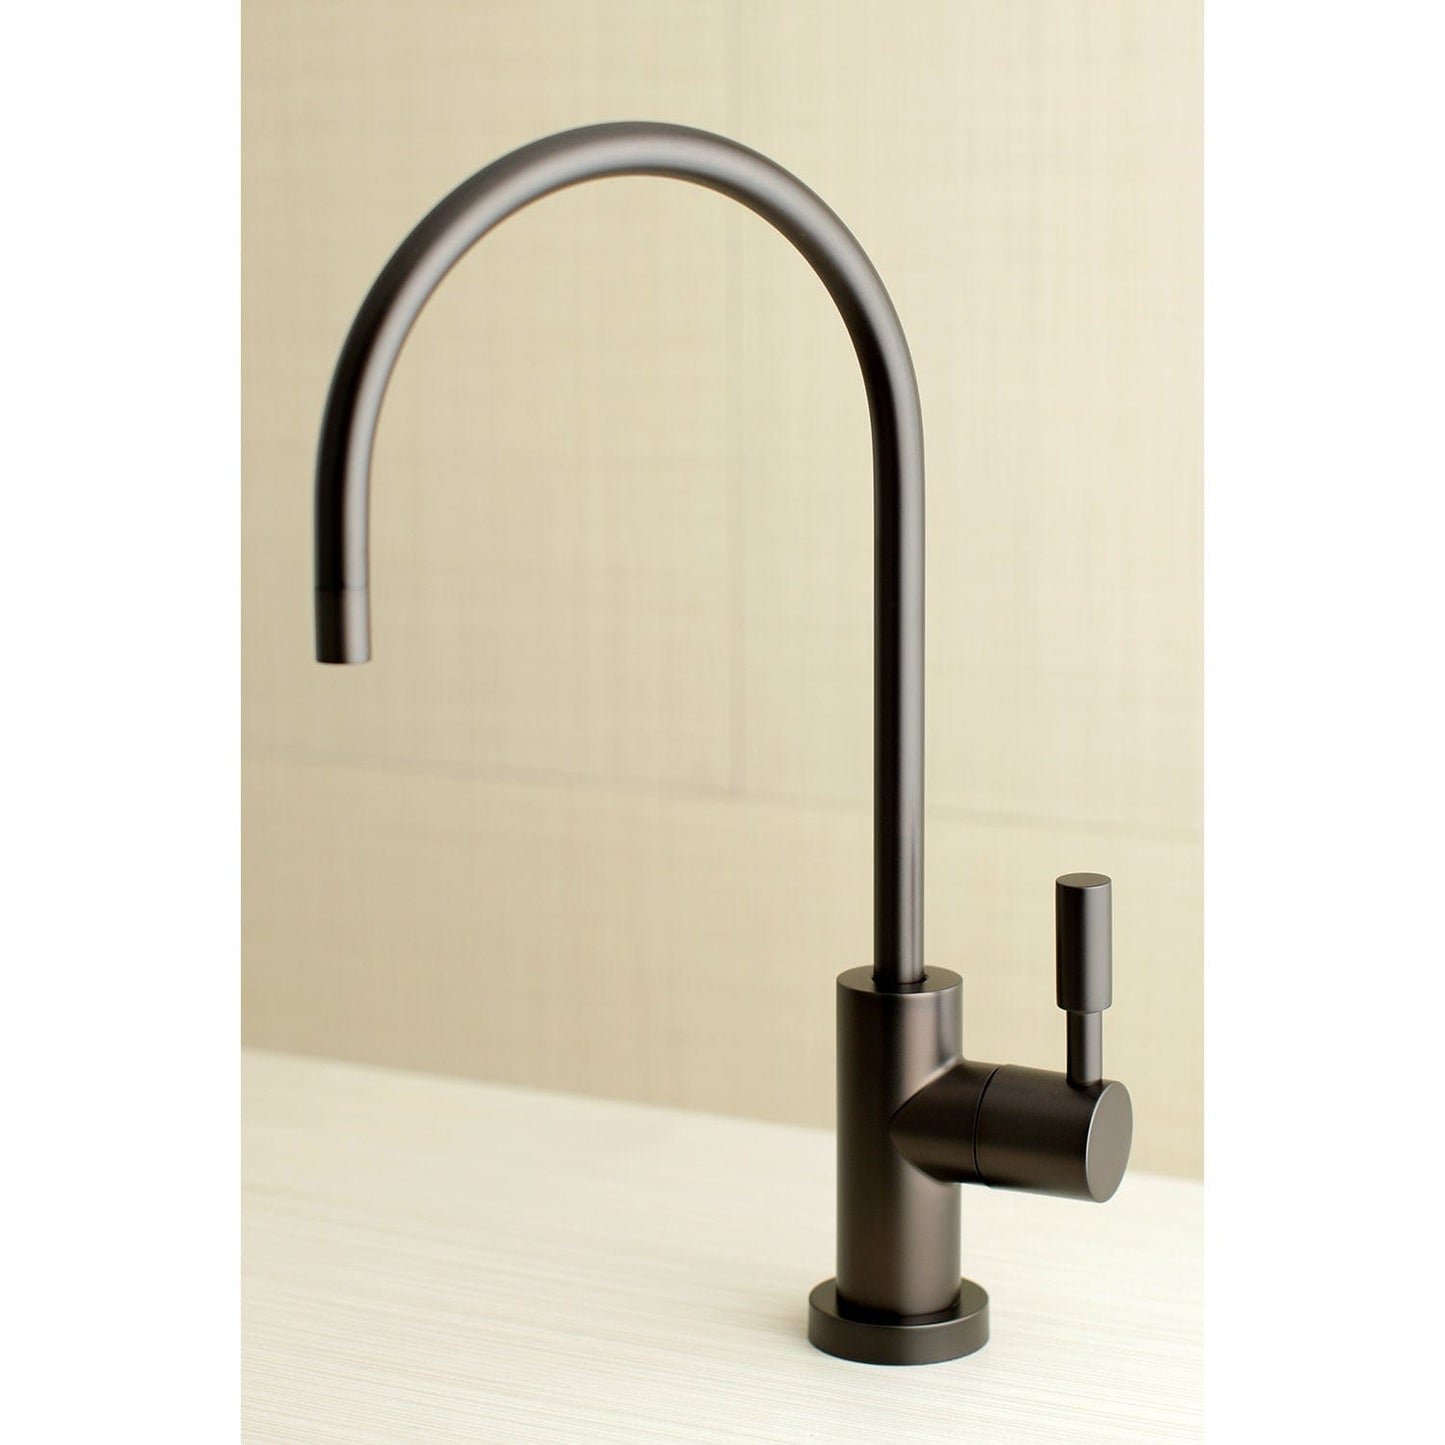 KINGSTON Brass Concord Reverse Osmosis System Filtration Water Air Gap Faucet - Oil Rubbed Bronze